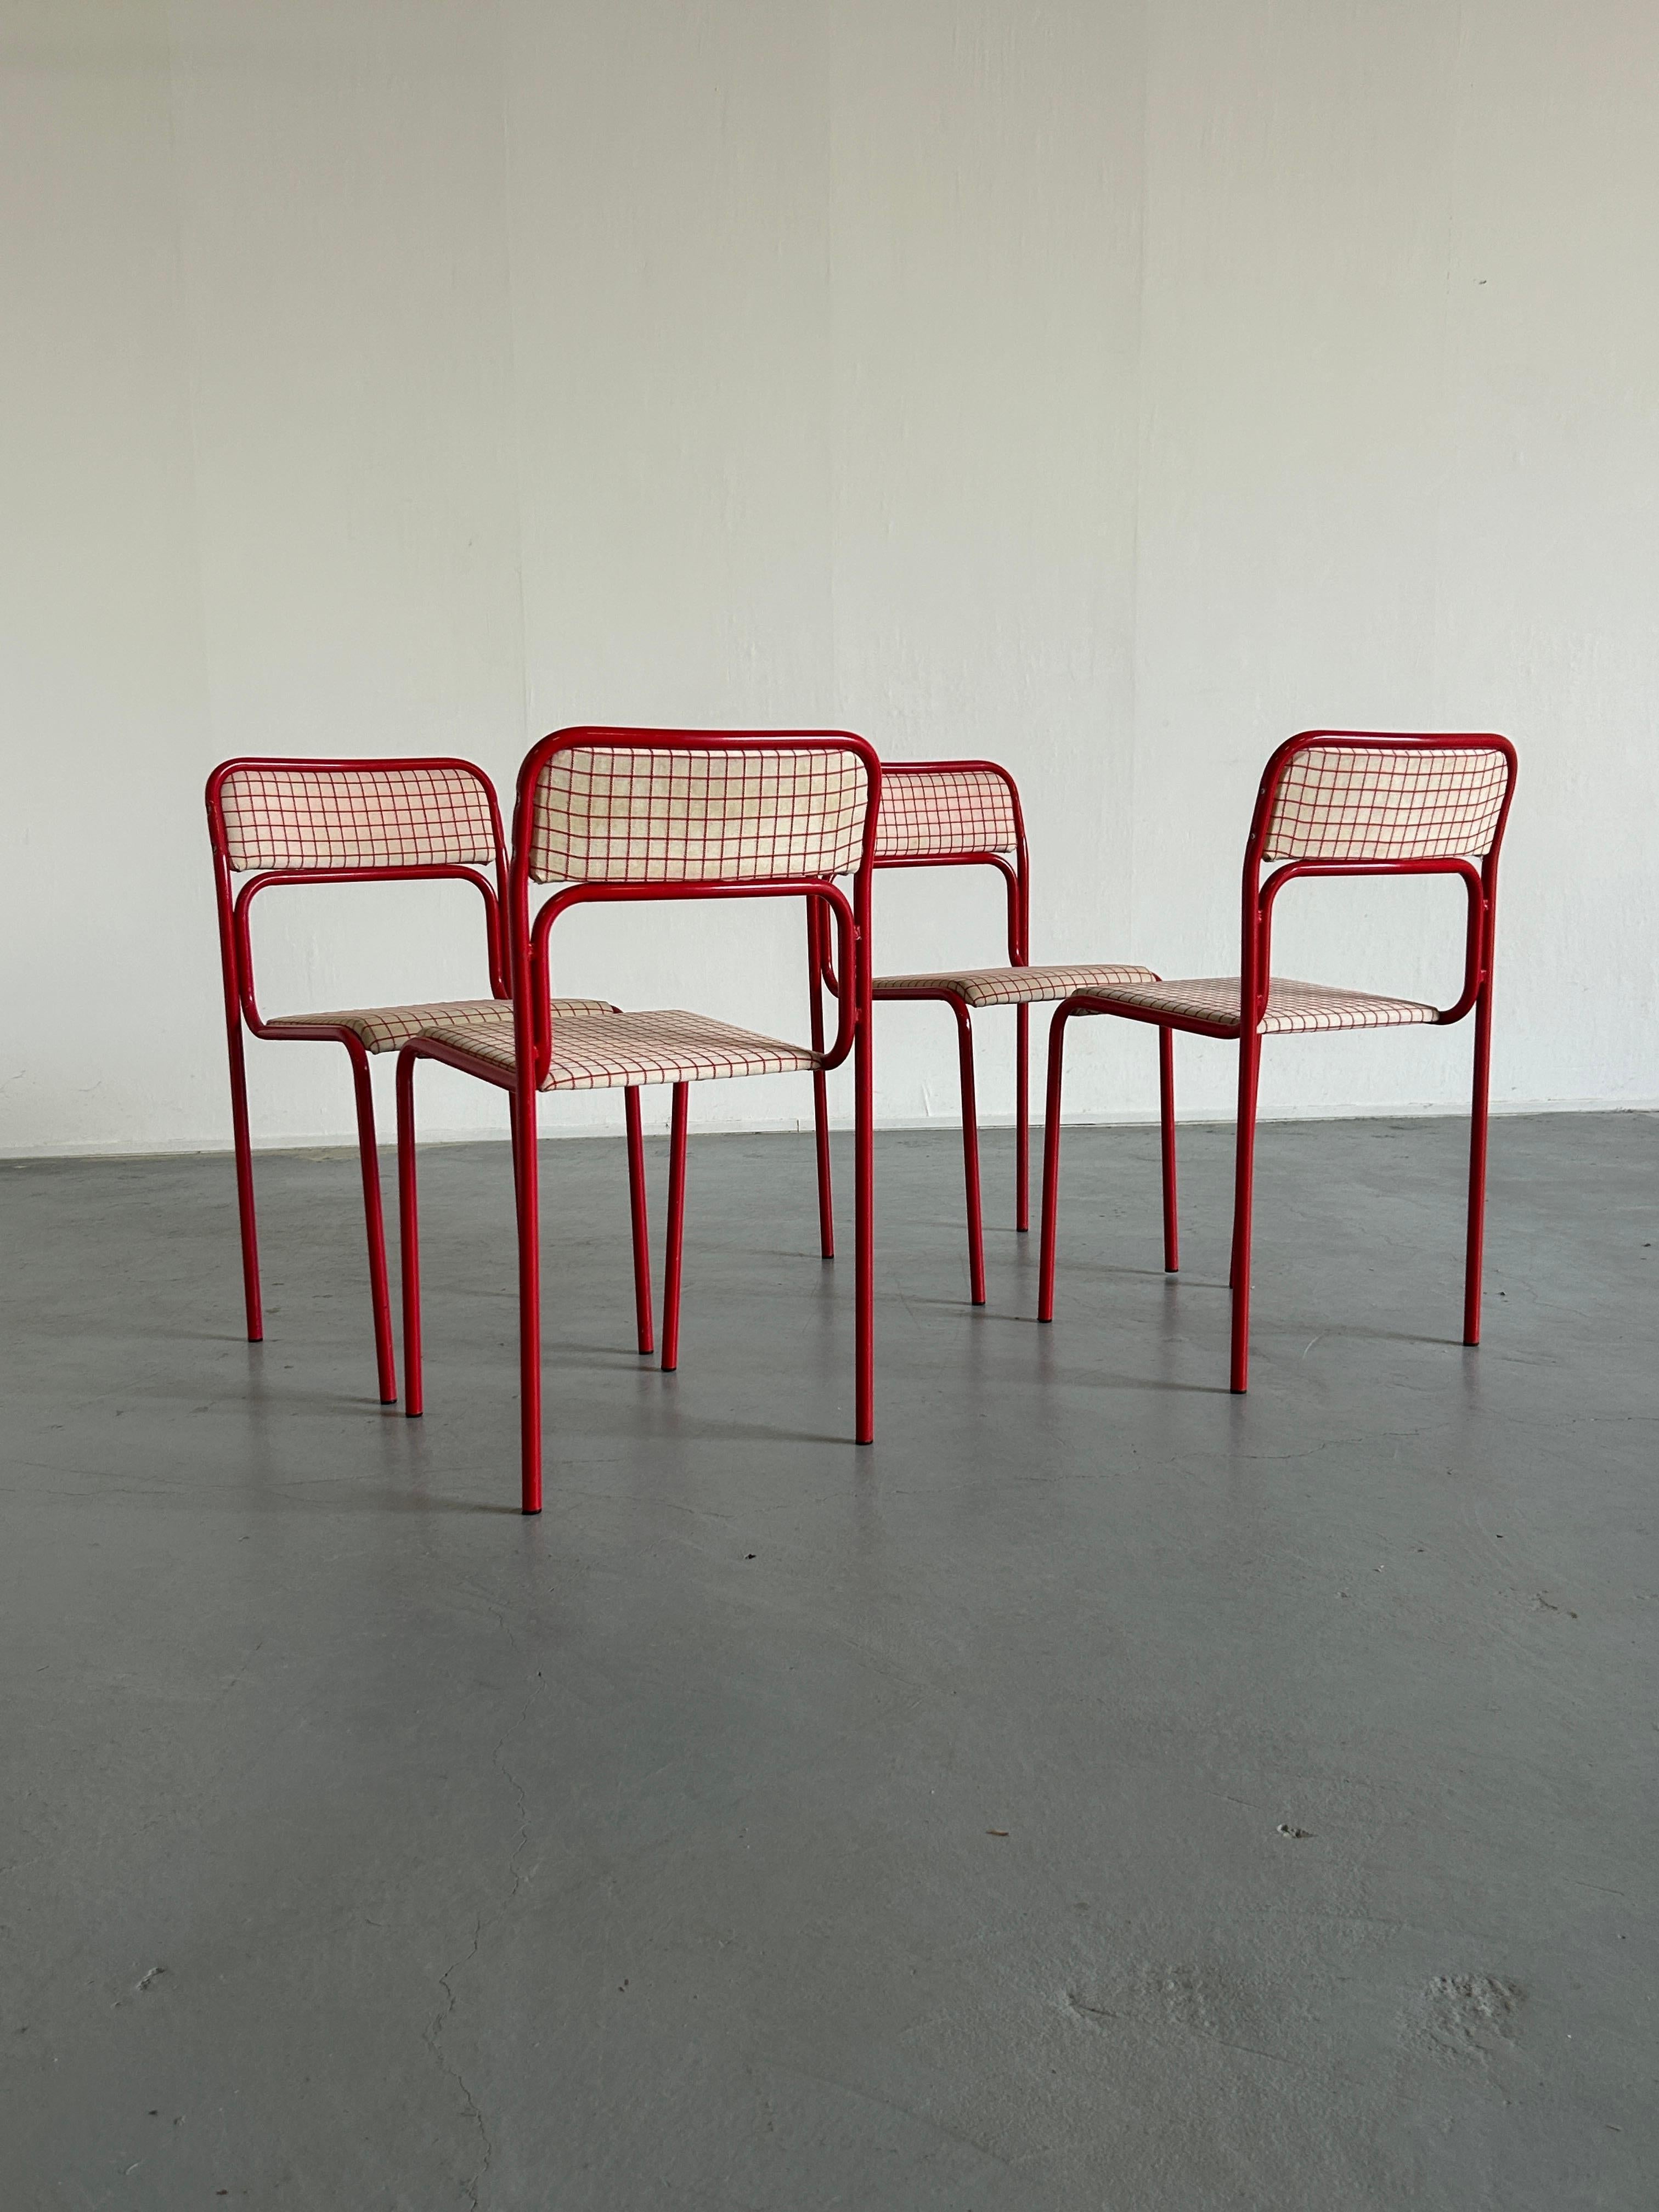 Italian Set of 4 Pop-Art Syle Tubular Steel Checkered Red Upholstery Chairs, 80s Italy